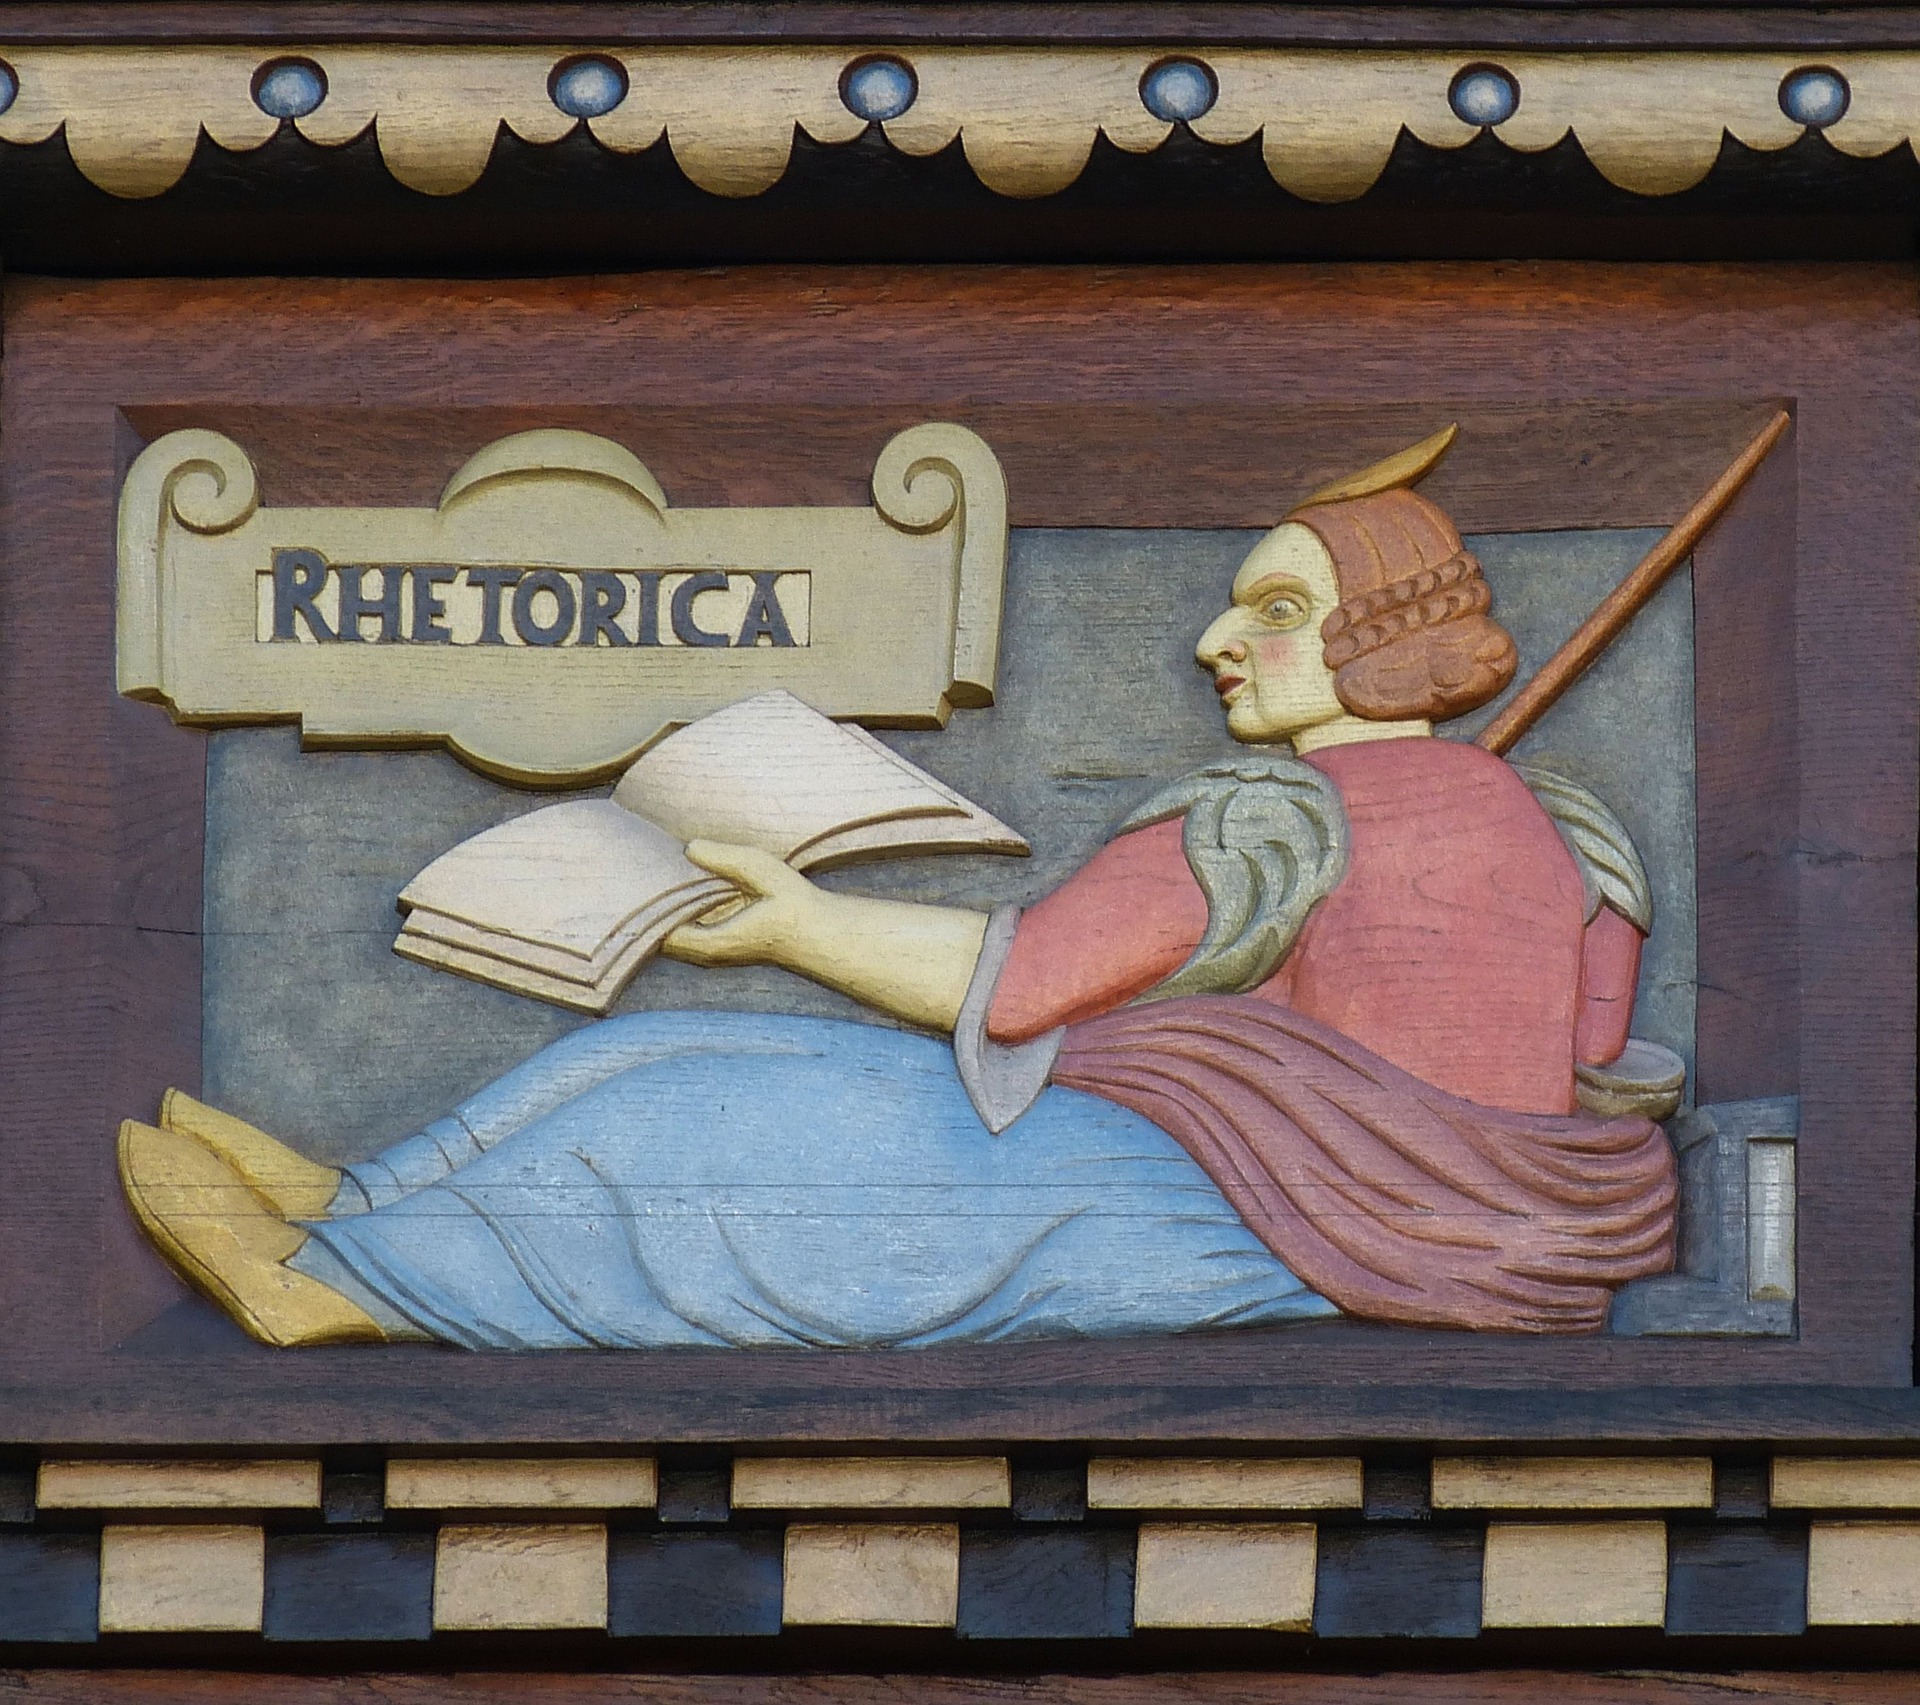 wood carving showing a seated figure holding a book, labeled "Rhetorica"